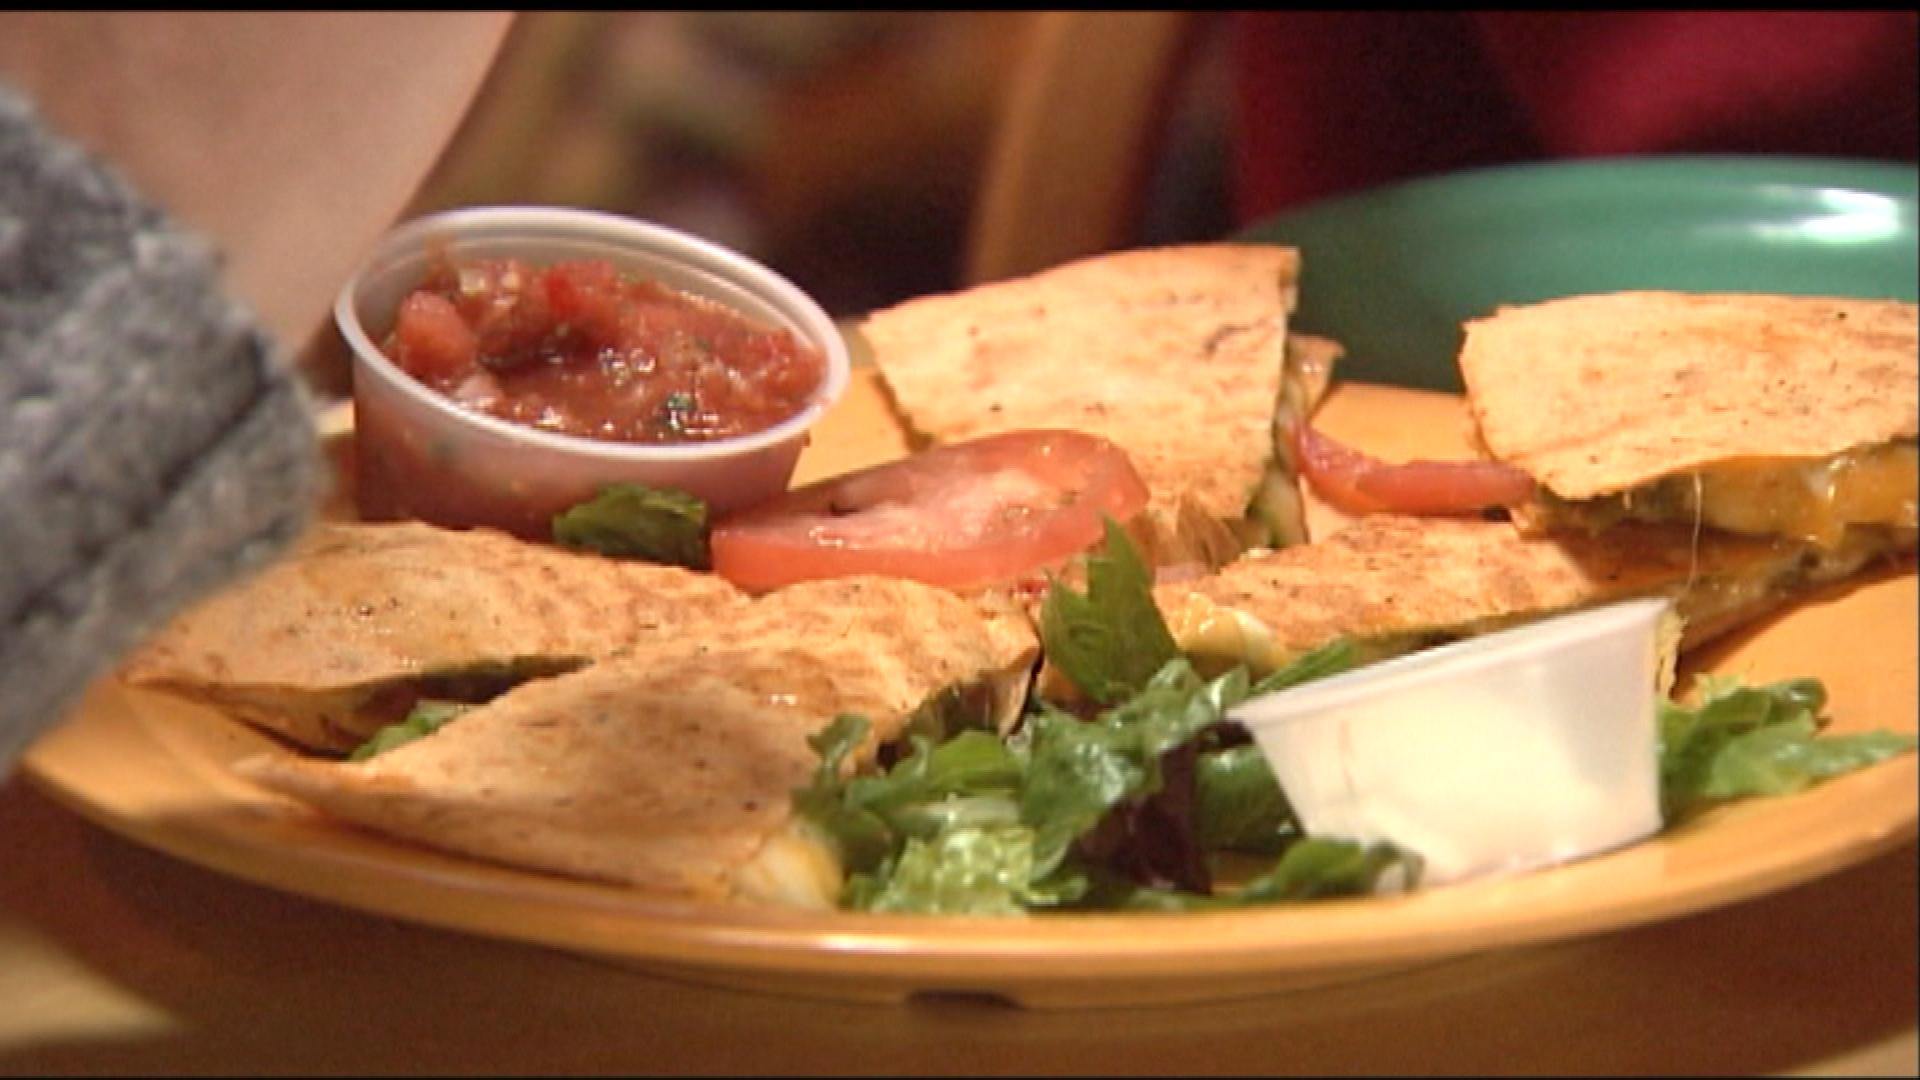 A meal from Restaurant Week (credit: CBS)